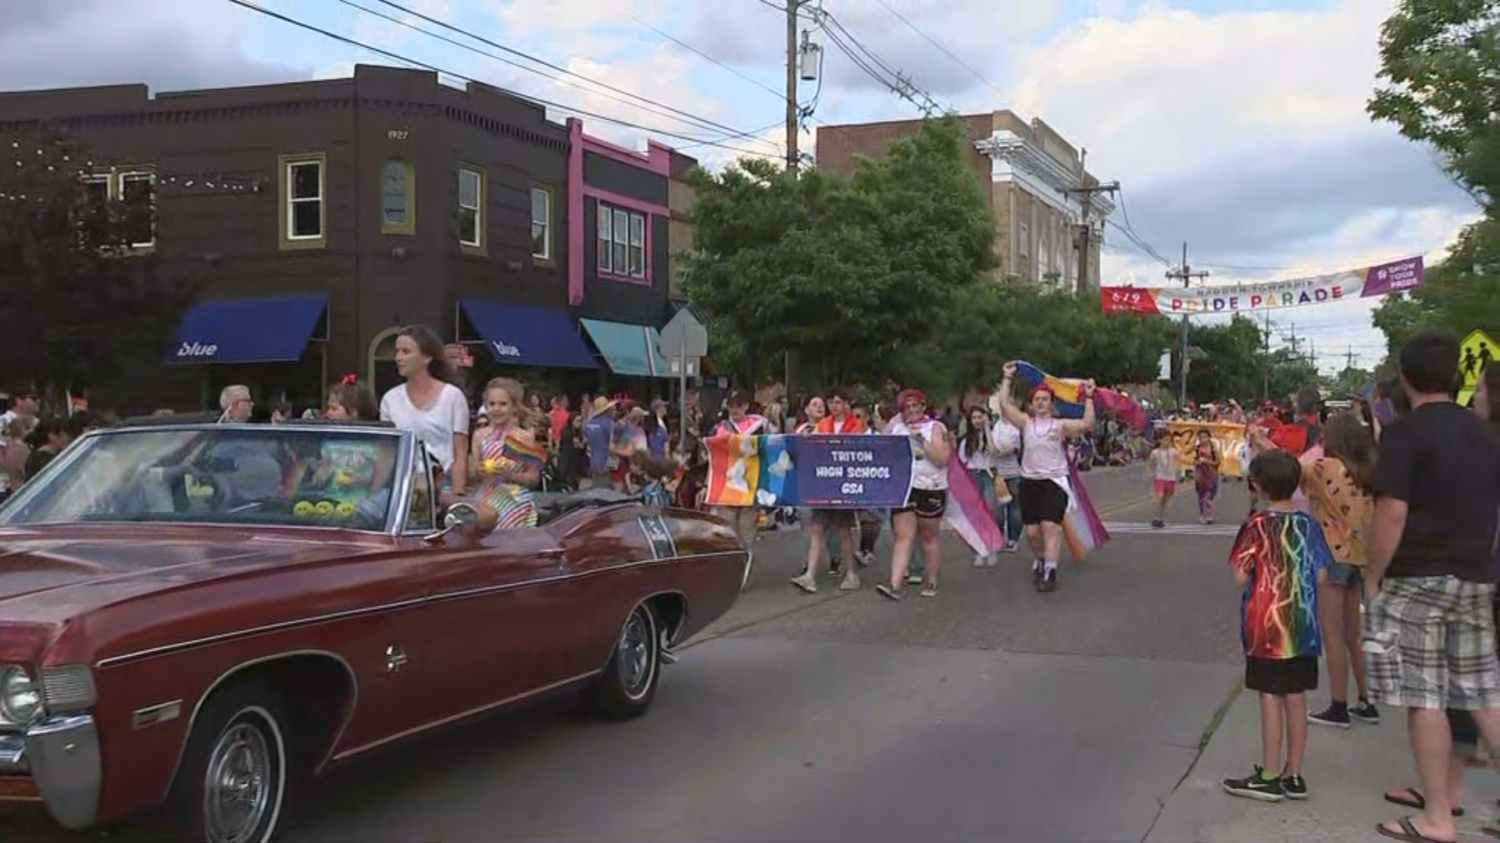 ‘Unbelievable’ Turnout For Haddon Township’s Second Pride Parade CBS